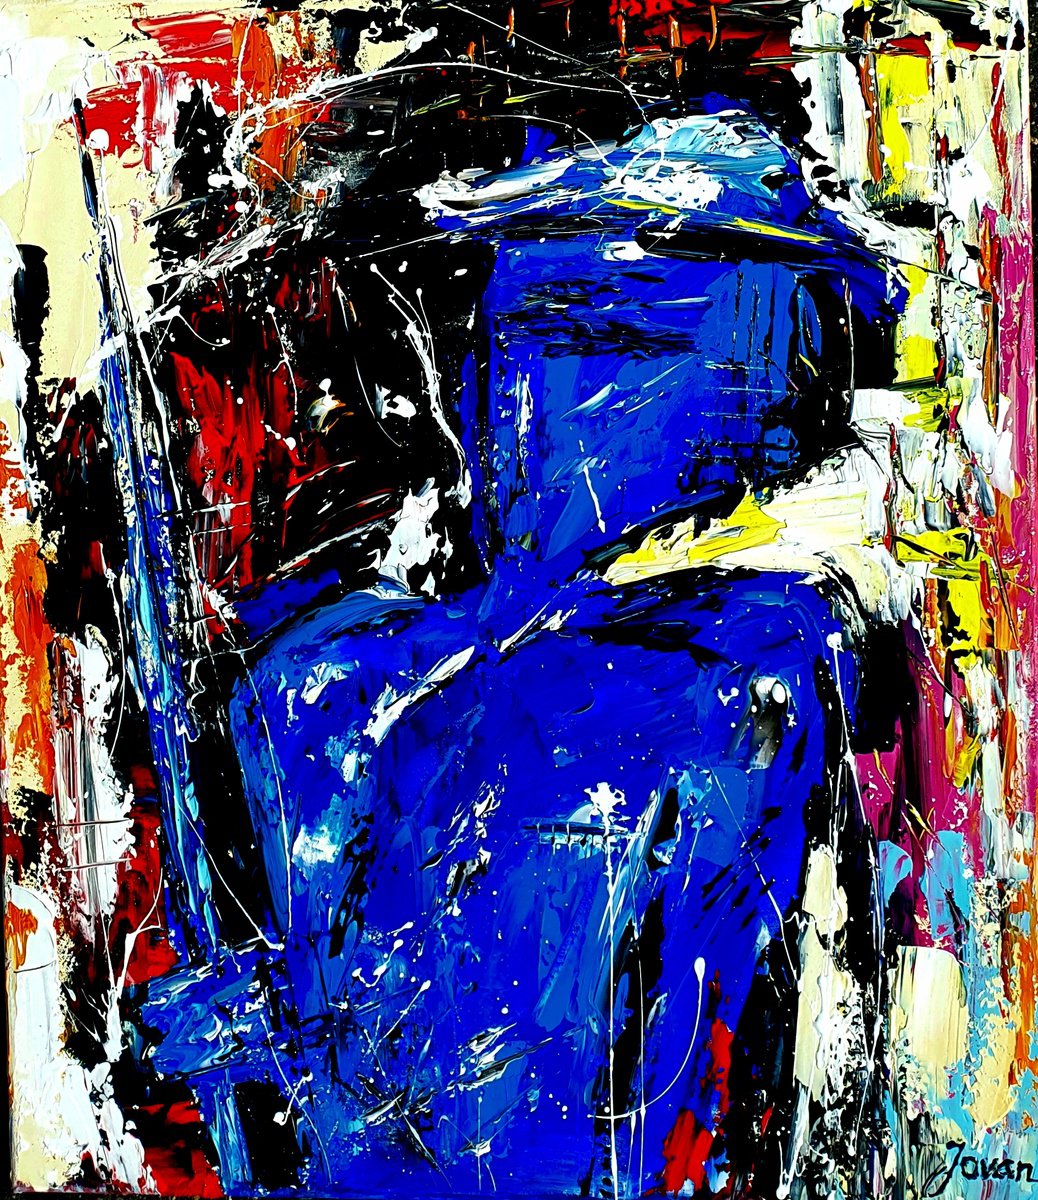 Abstract composition, Blue Soldier by Jovan Srijemac